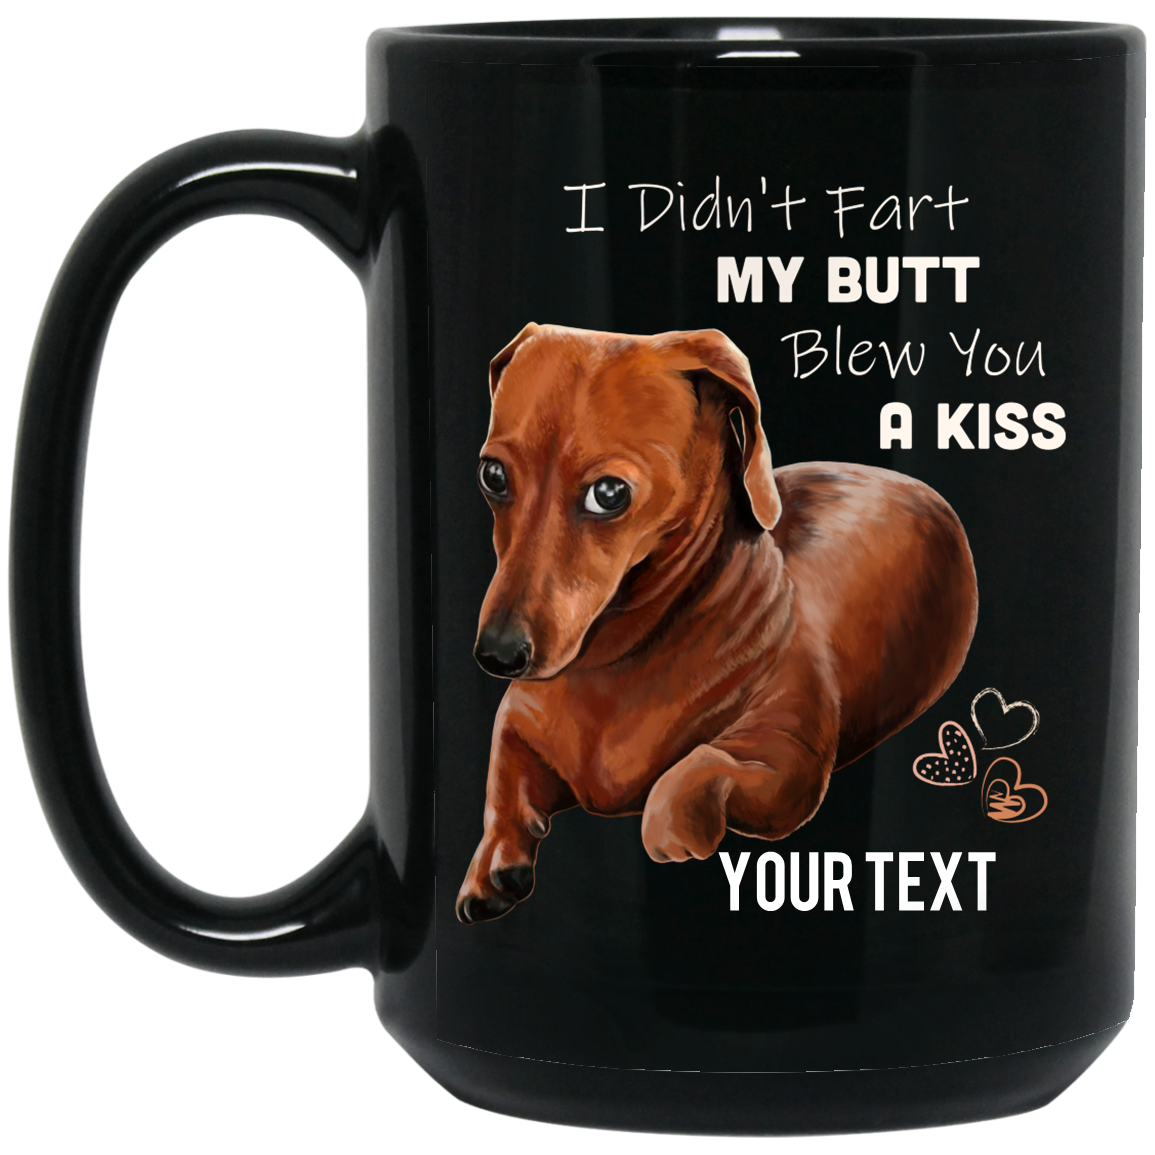 Dachshund Mug, ADD YOUR TEXT, I Didn't Fart My Butt Blew You A Kiss - GoneBold.gift